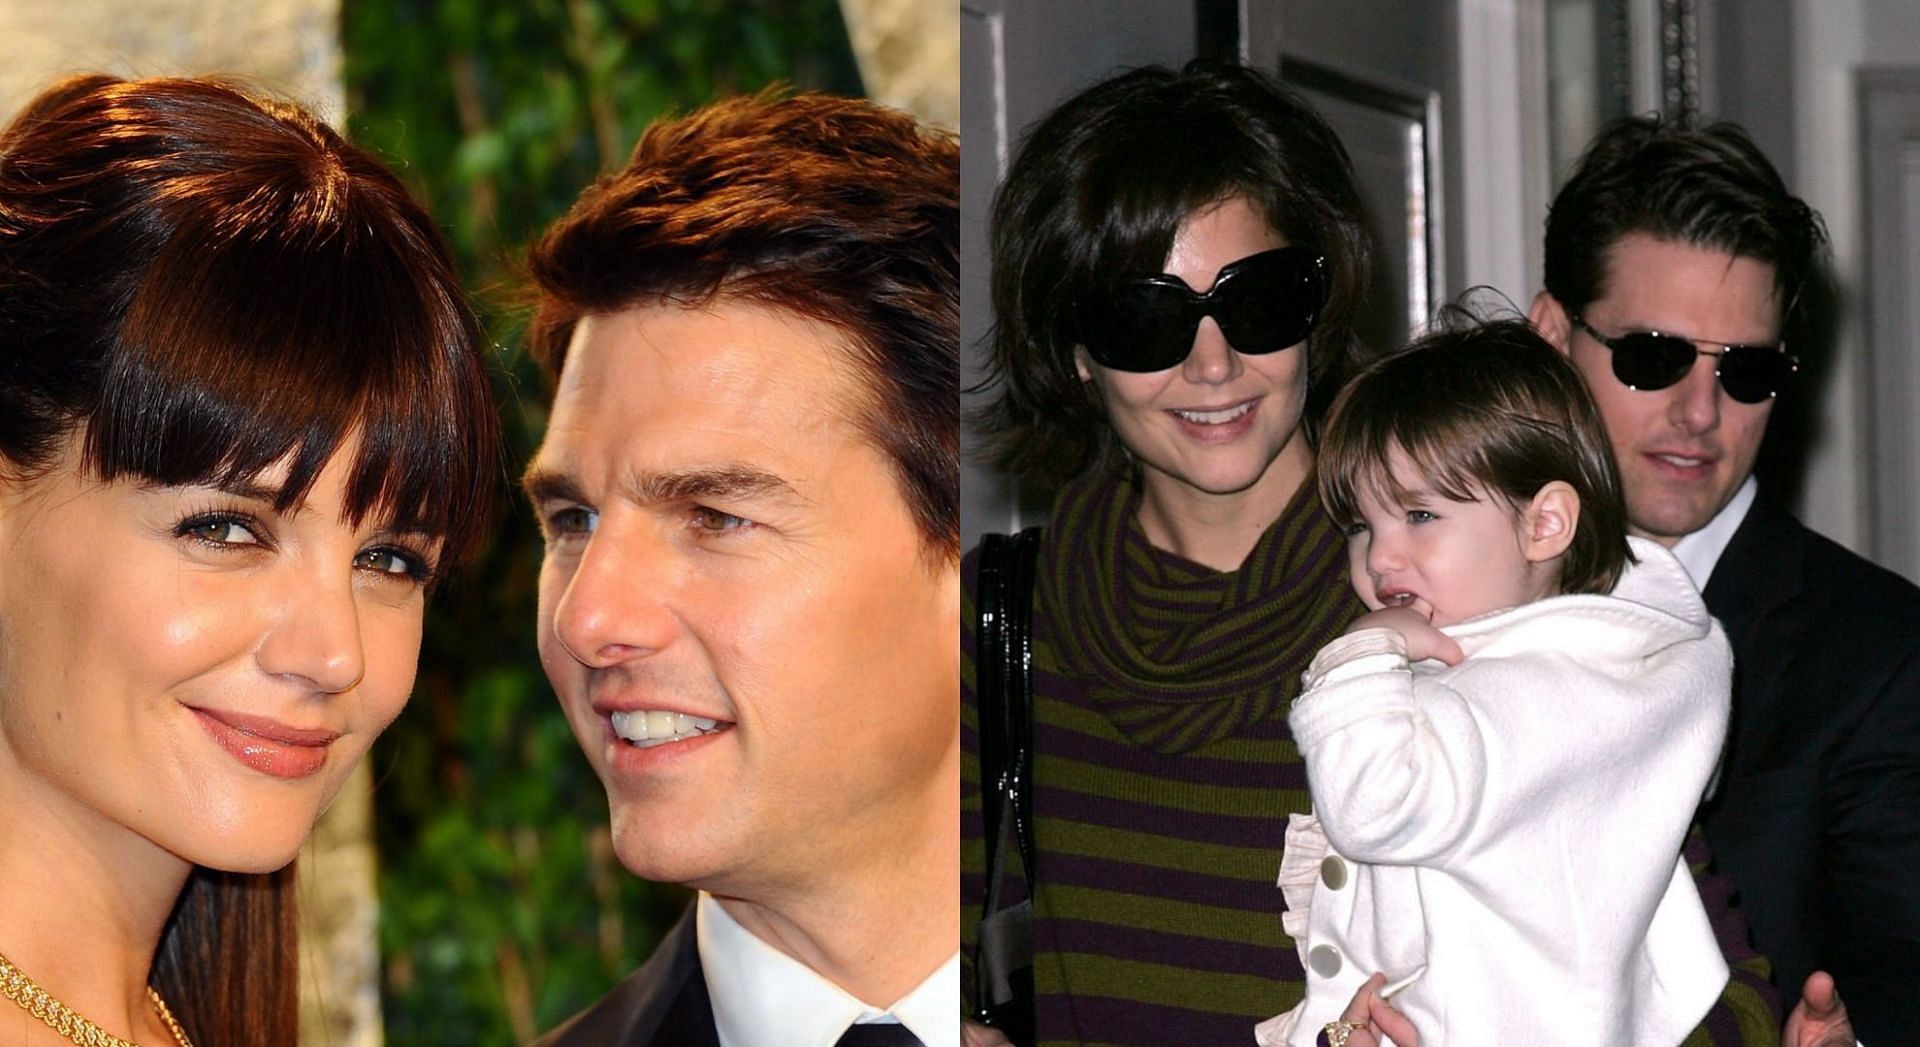 Tom Cruise and Katie Holmes&rsquo; daughter Suri recently made her singing debut in the film &quot;Alone Together&quot; (Image via Anthony Harvey/Getty Images and James Devaney/WireImage)